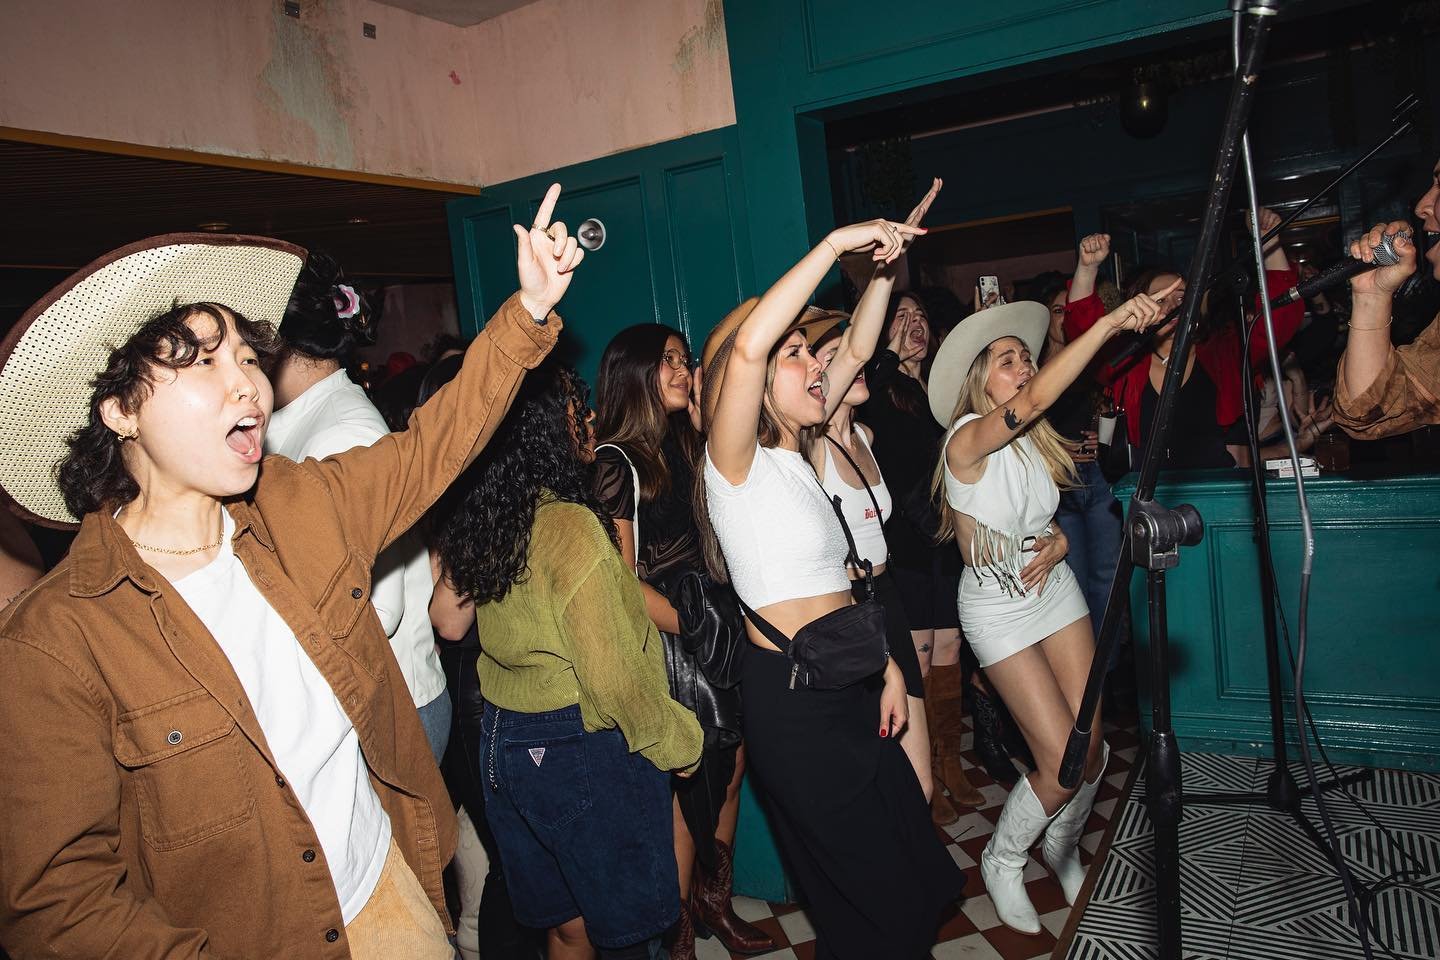 ₊⊹⁀➴ nvr seen this many queers in cowboy🤠hats in one gay ass space💕thank you to everyone who came out to sing and dance at our first country karaoke &amp; dance night!

➻❥ special thanks to our karaoke host @rivkah.reyes 
and our dj extraordinaire 